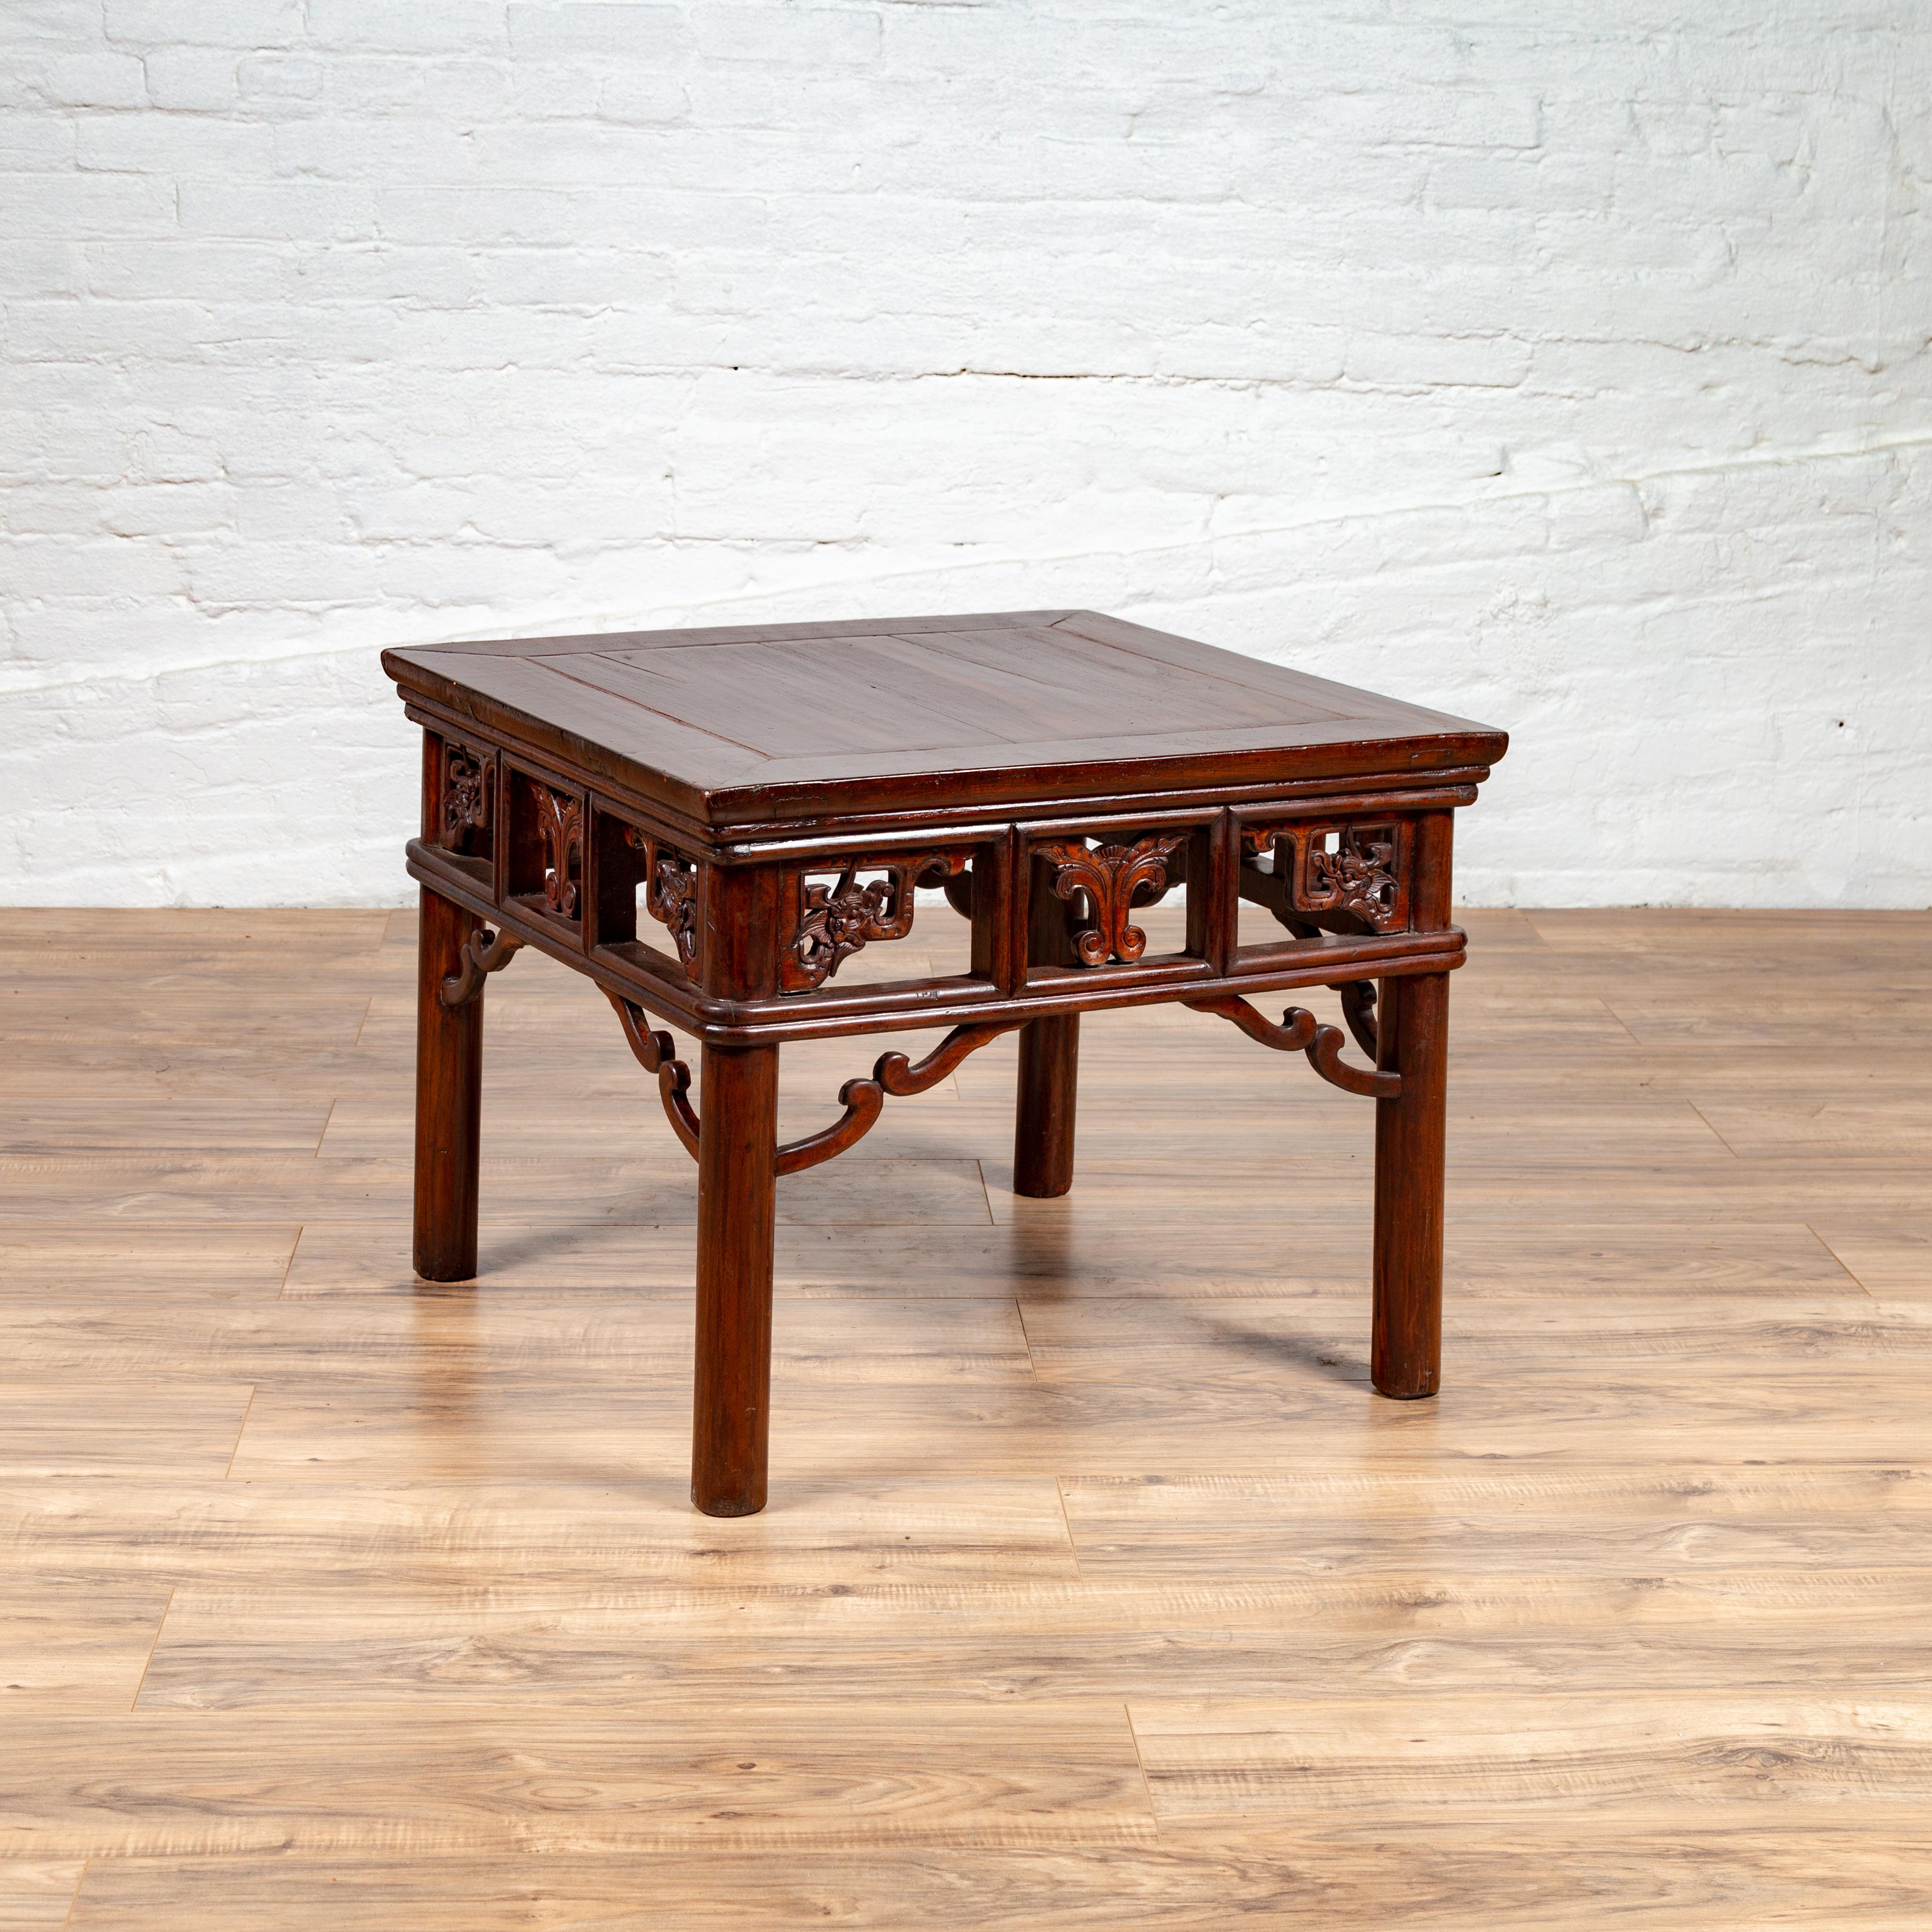 Chinese Antique Side Table with Open Fretwork Design and Dark Wood Patina For Sale 7